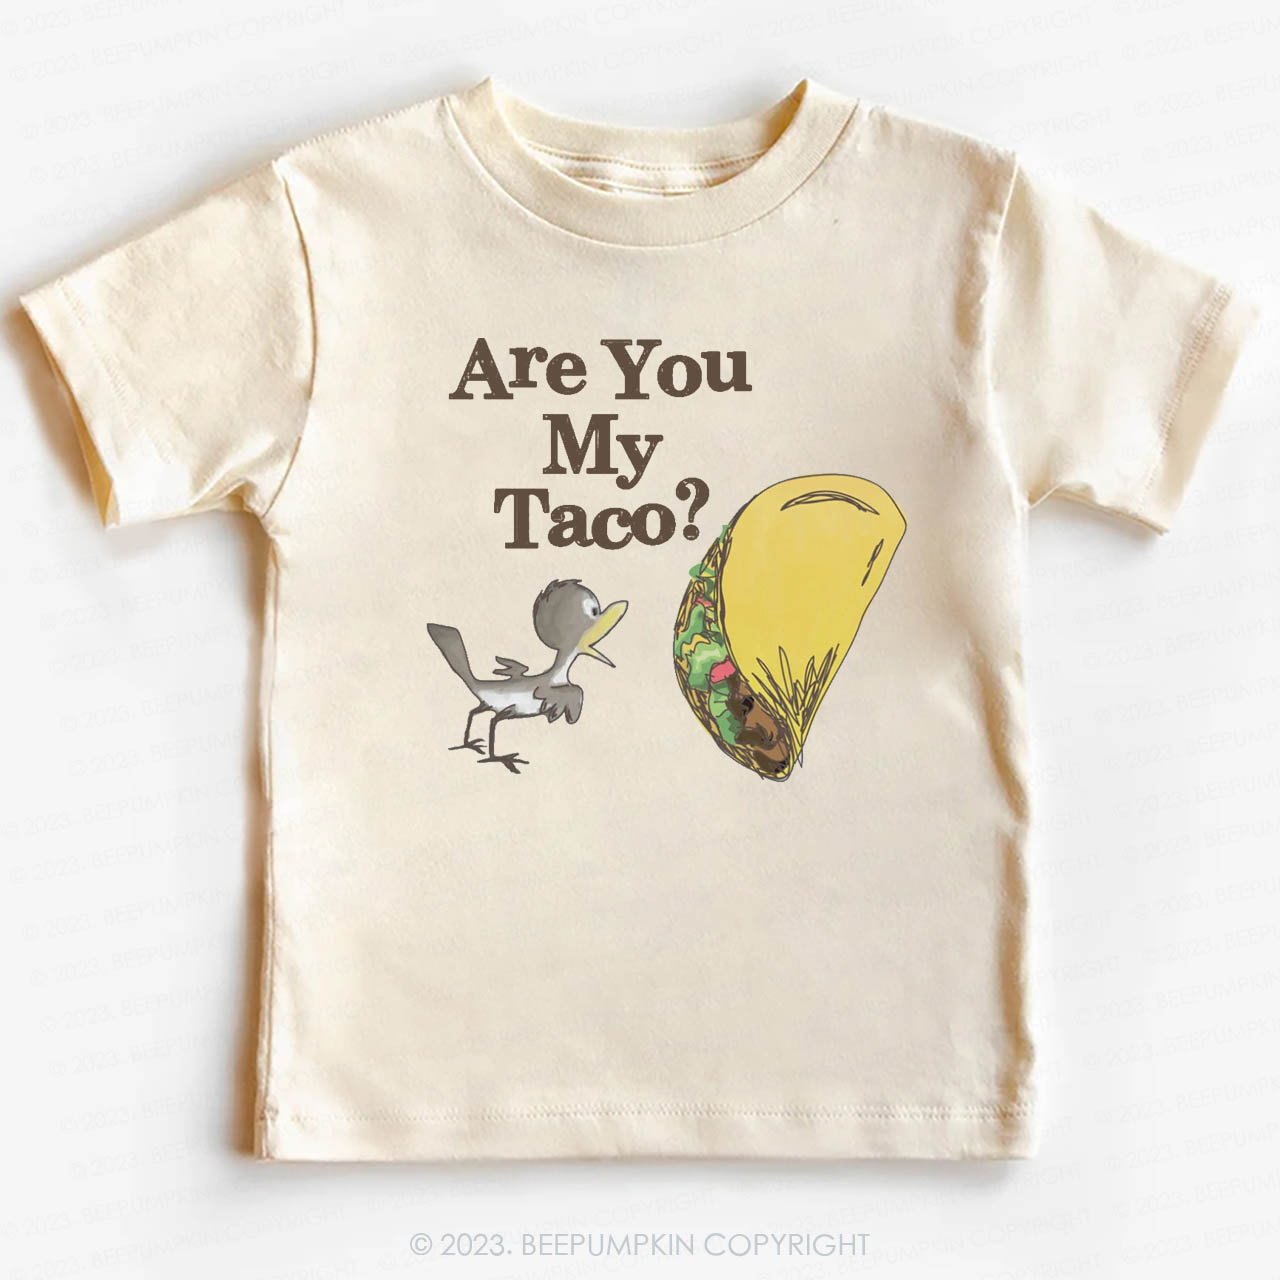 Are You My Taco Kids Shirt